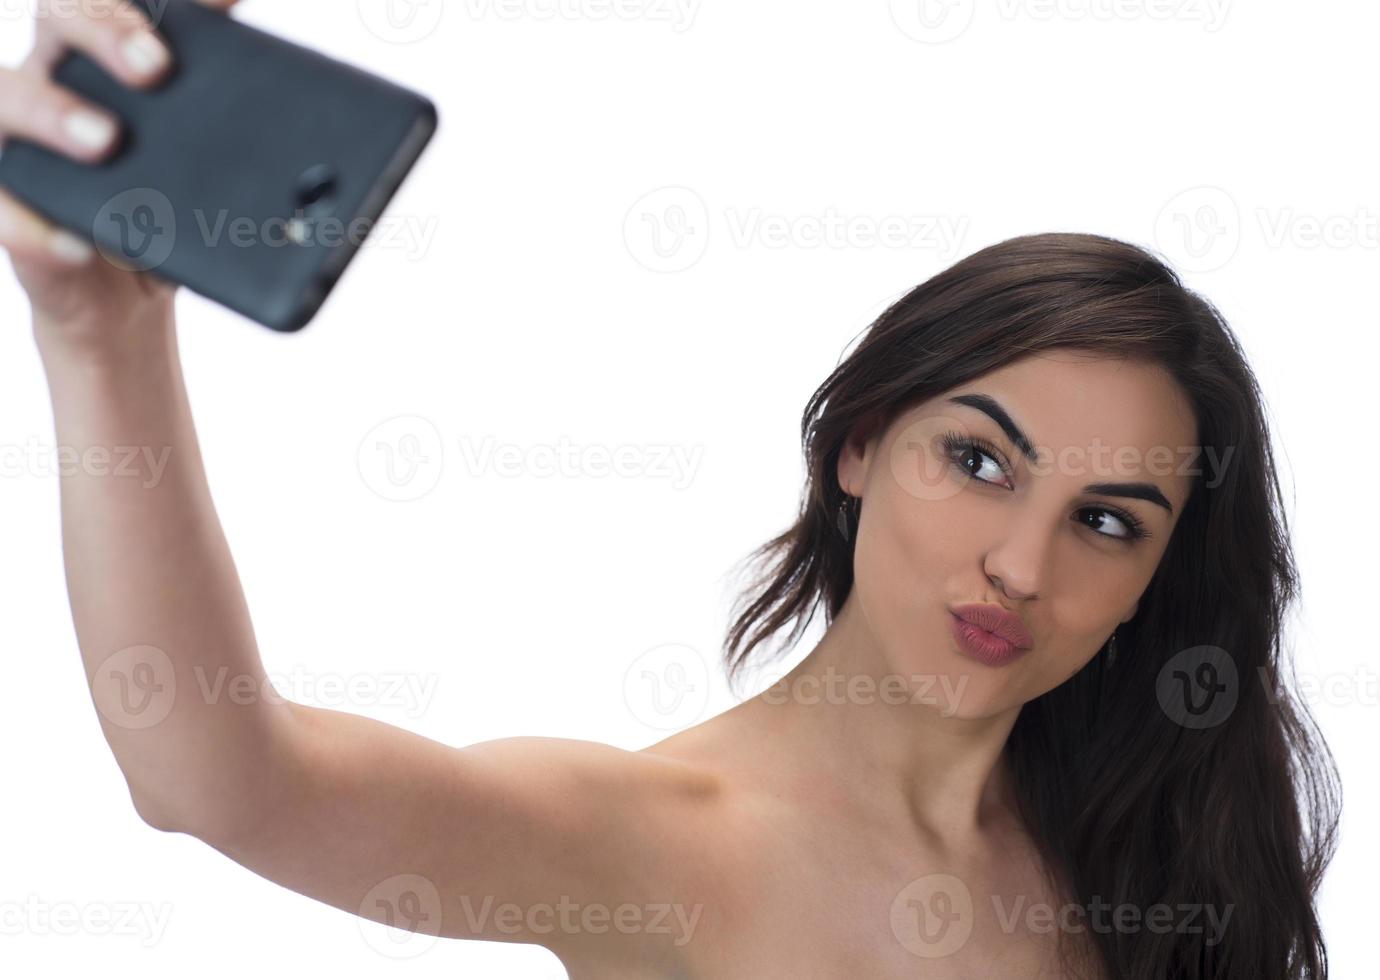 Image of beautiful brunette woman laughing while taking selfie photo on cellphone isolated over white background